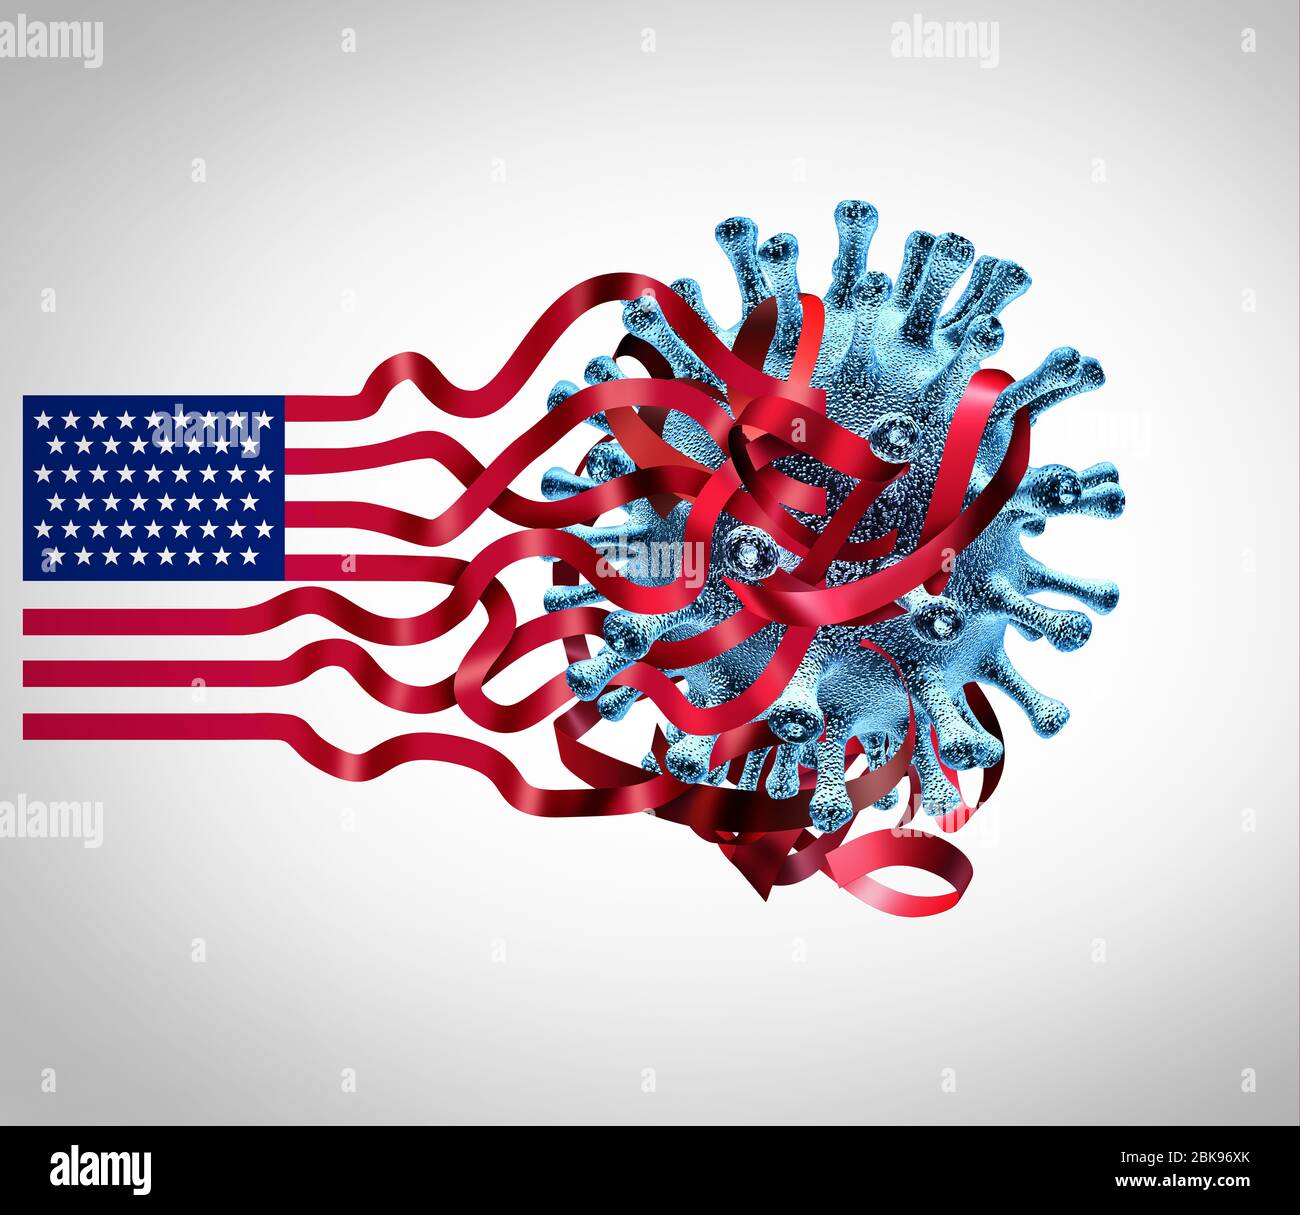 US coronavirus challenges and United States covid-19 virus infection issues as an American healthcare crisis with the USA flag entangled. Stock Photo